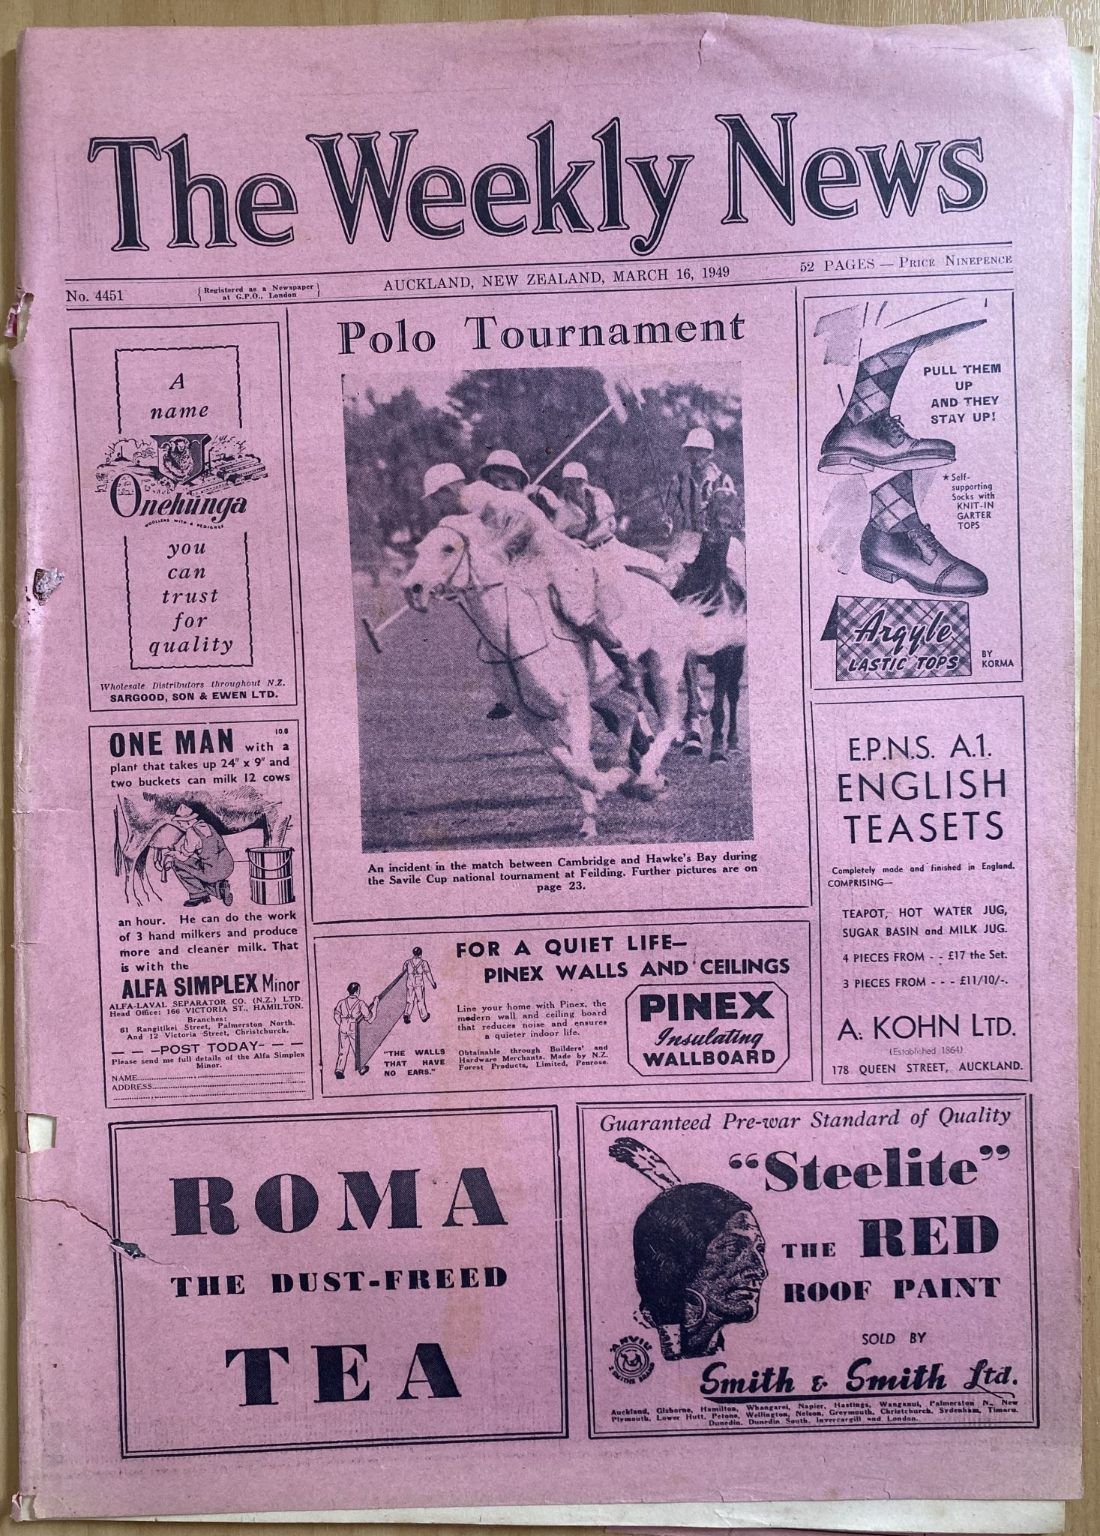 OLD NEWSPAPER: The Weekly News, No. 4451, 16 March 1949